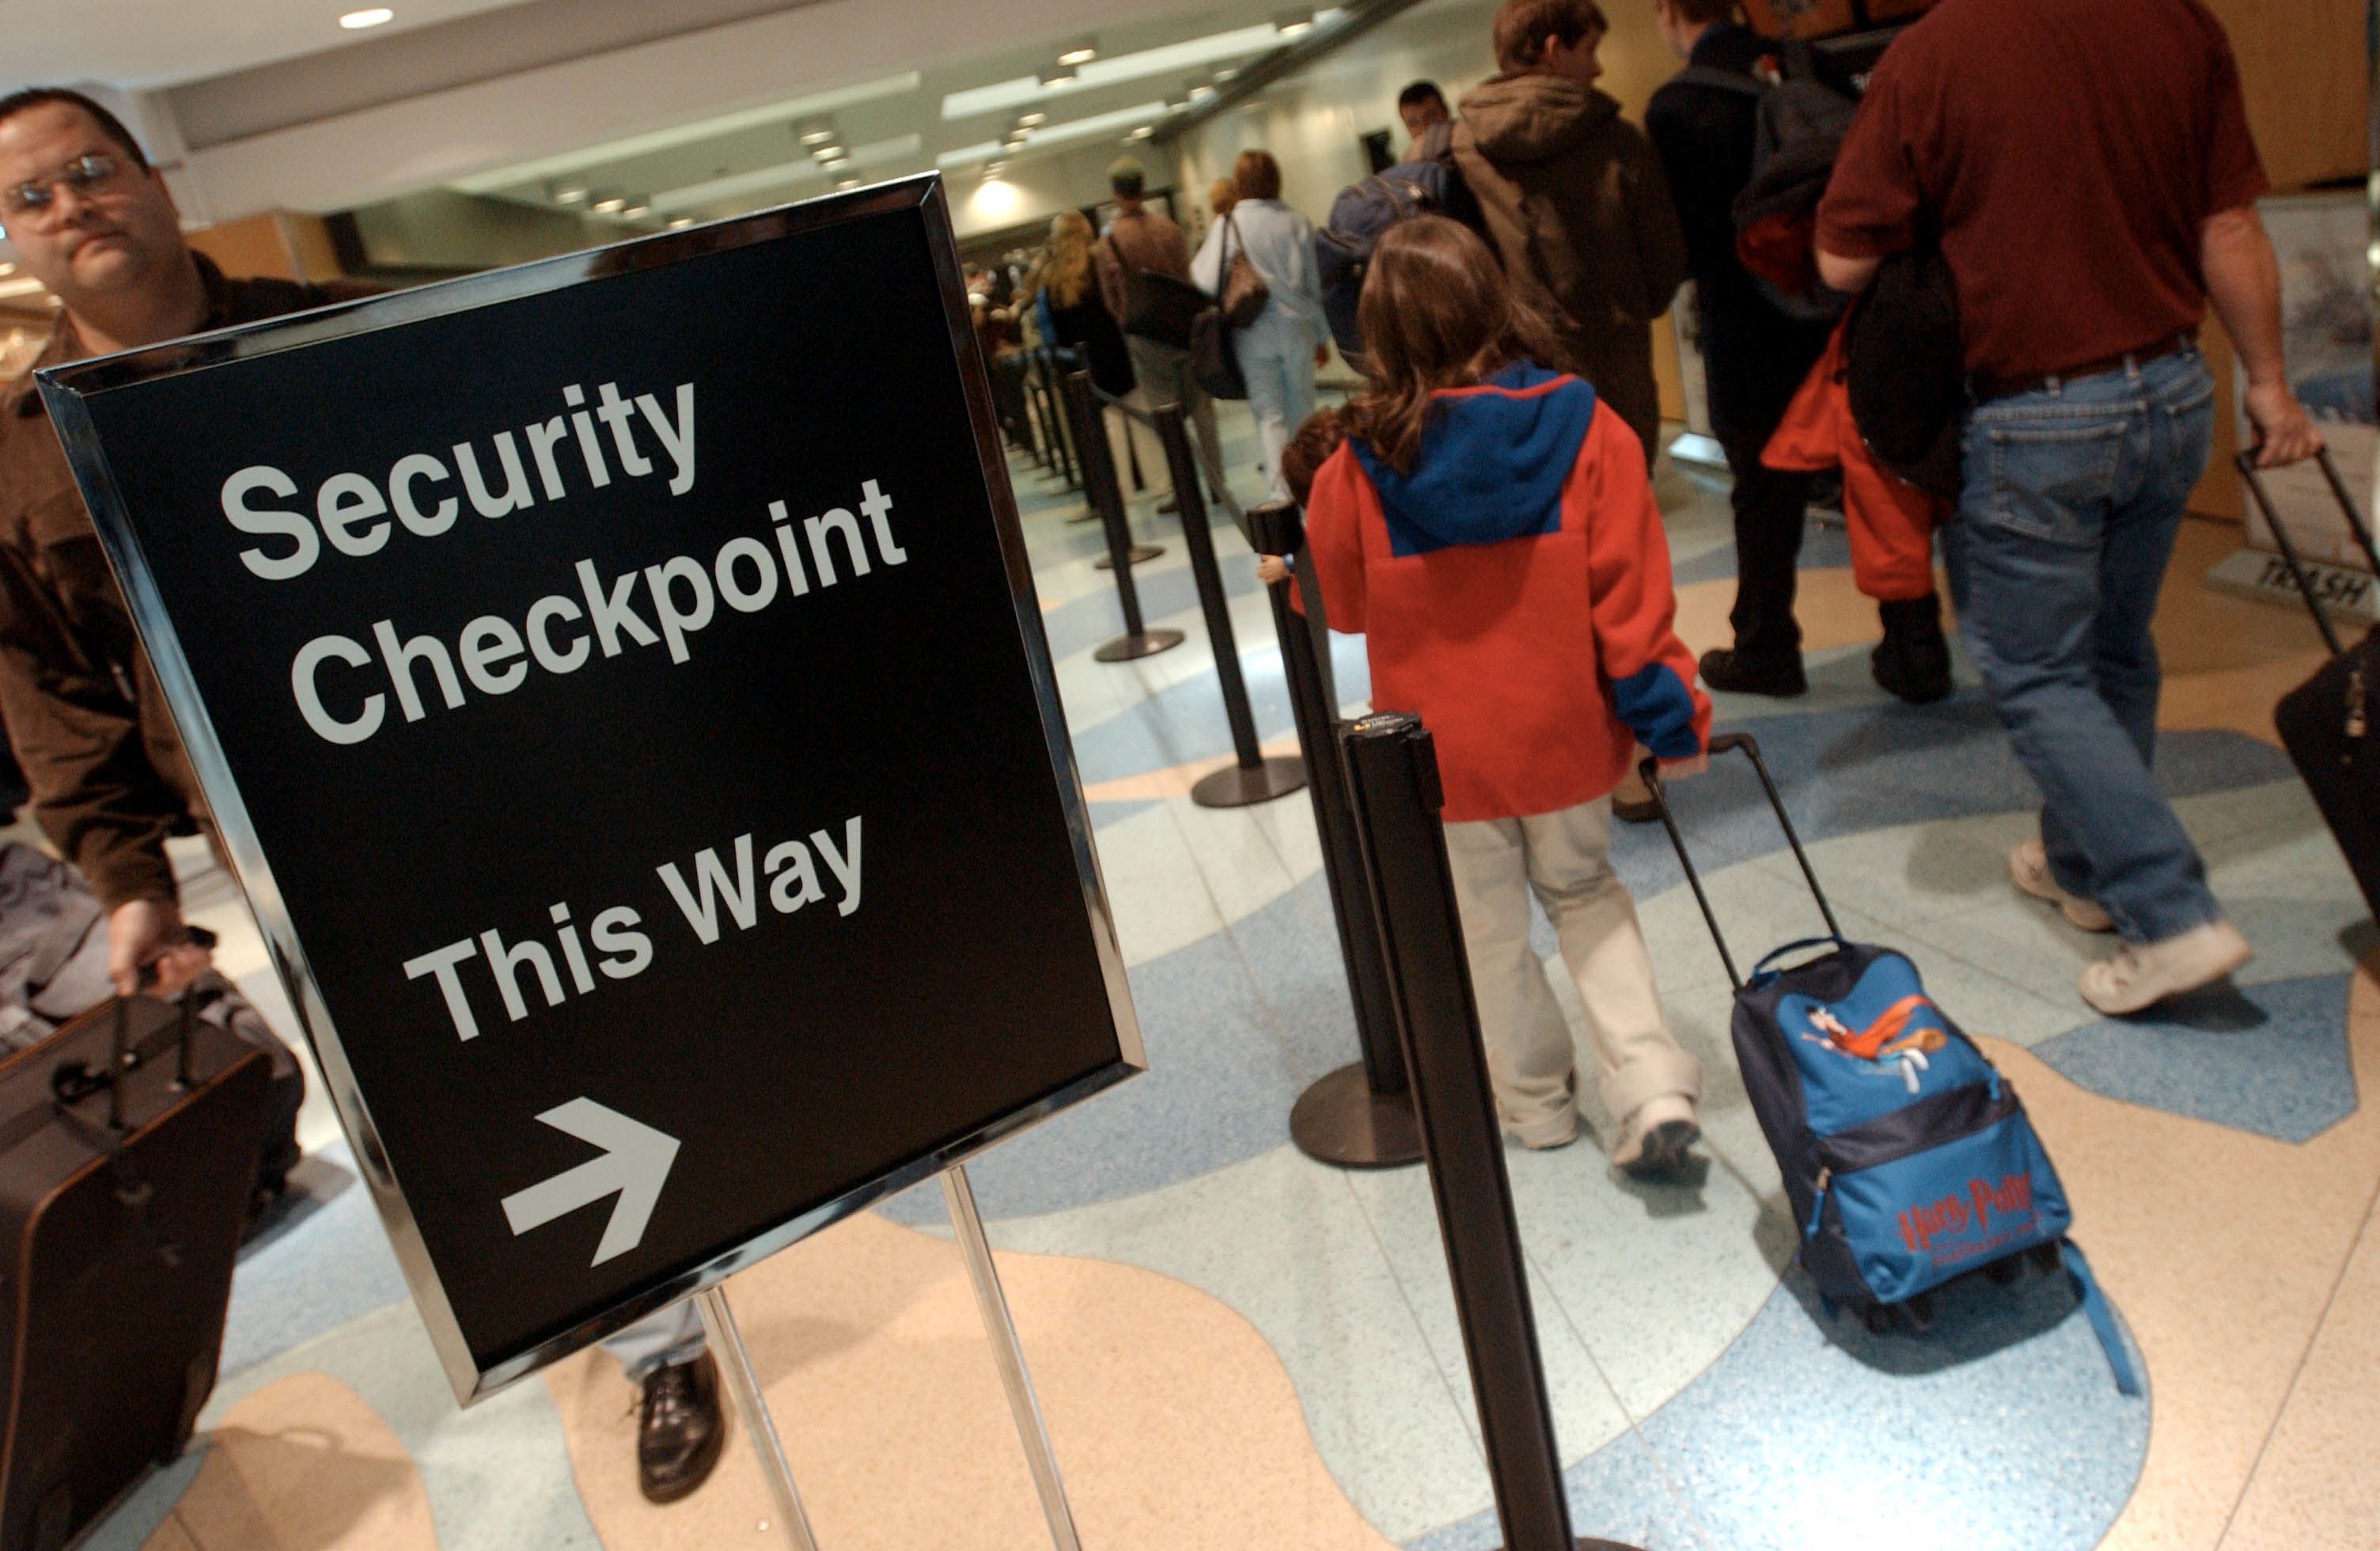 'Safe-list' travelers get fast track through airport security | CNN Business